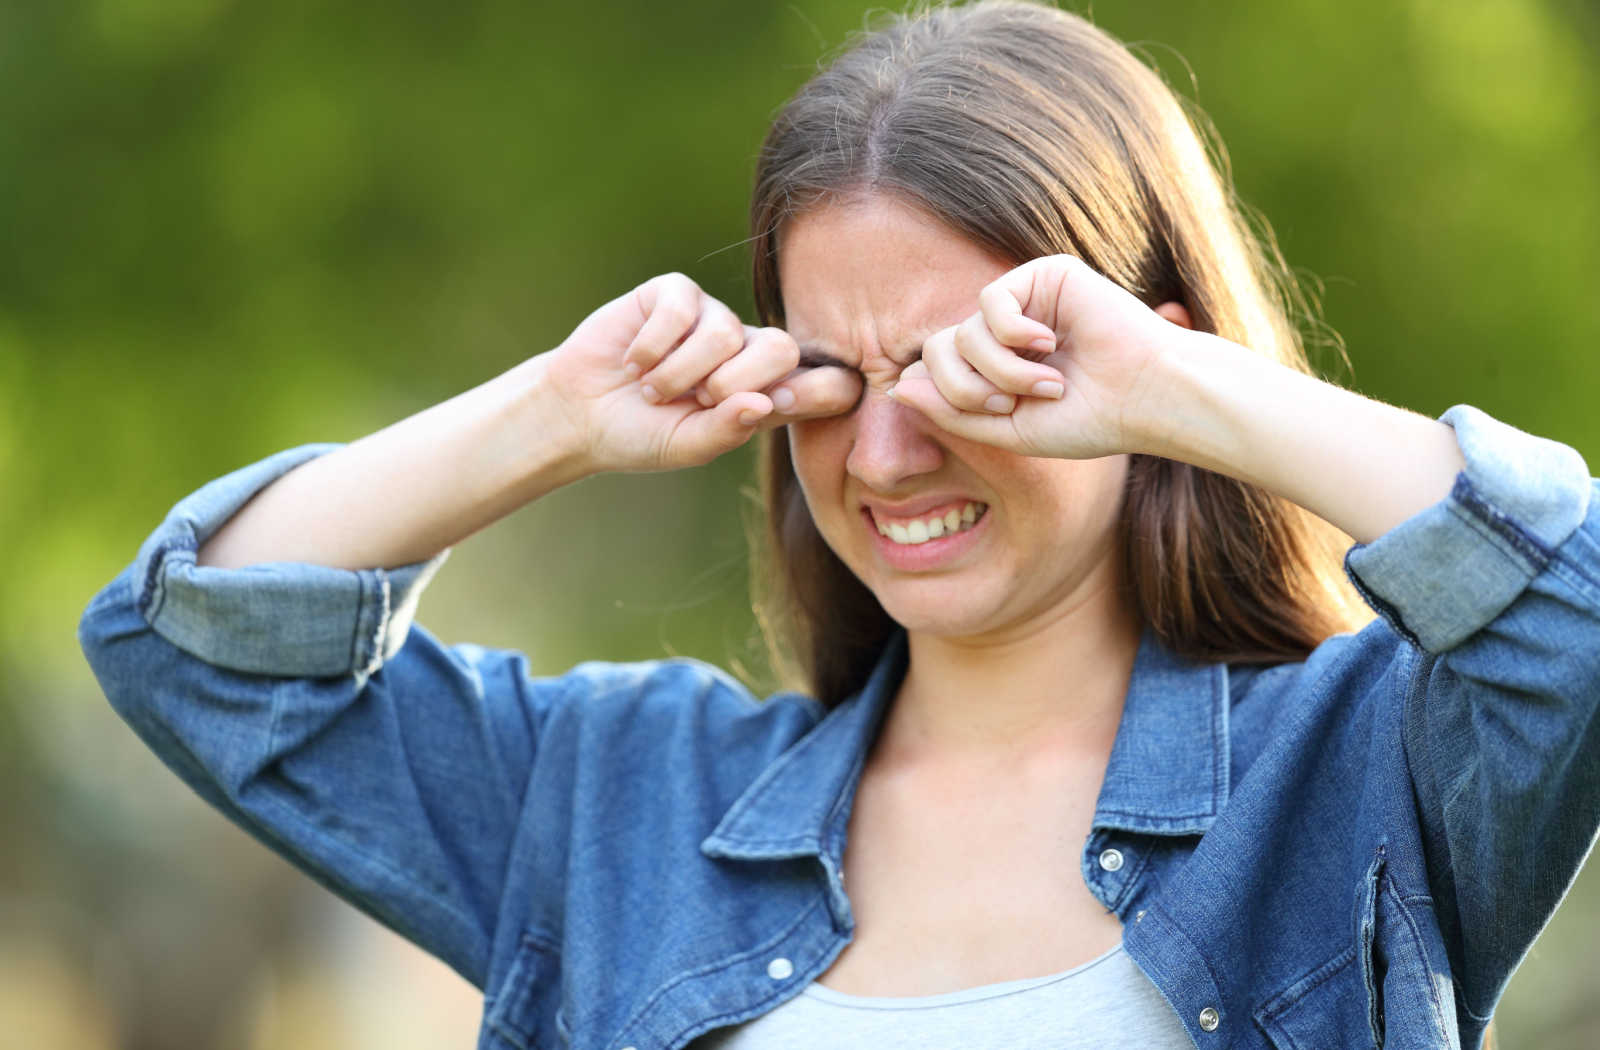 A woman vigorously rubbing both her eyes as she suffers severe itchiness due to an eye allergy.